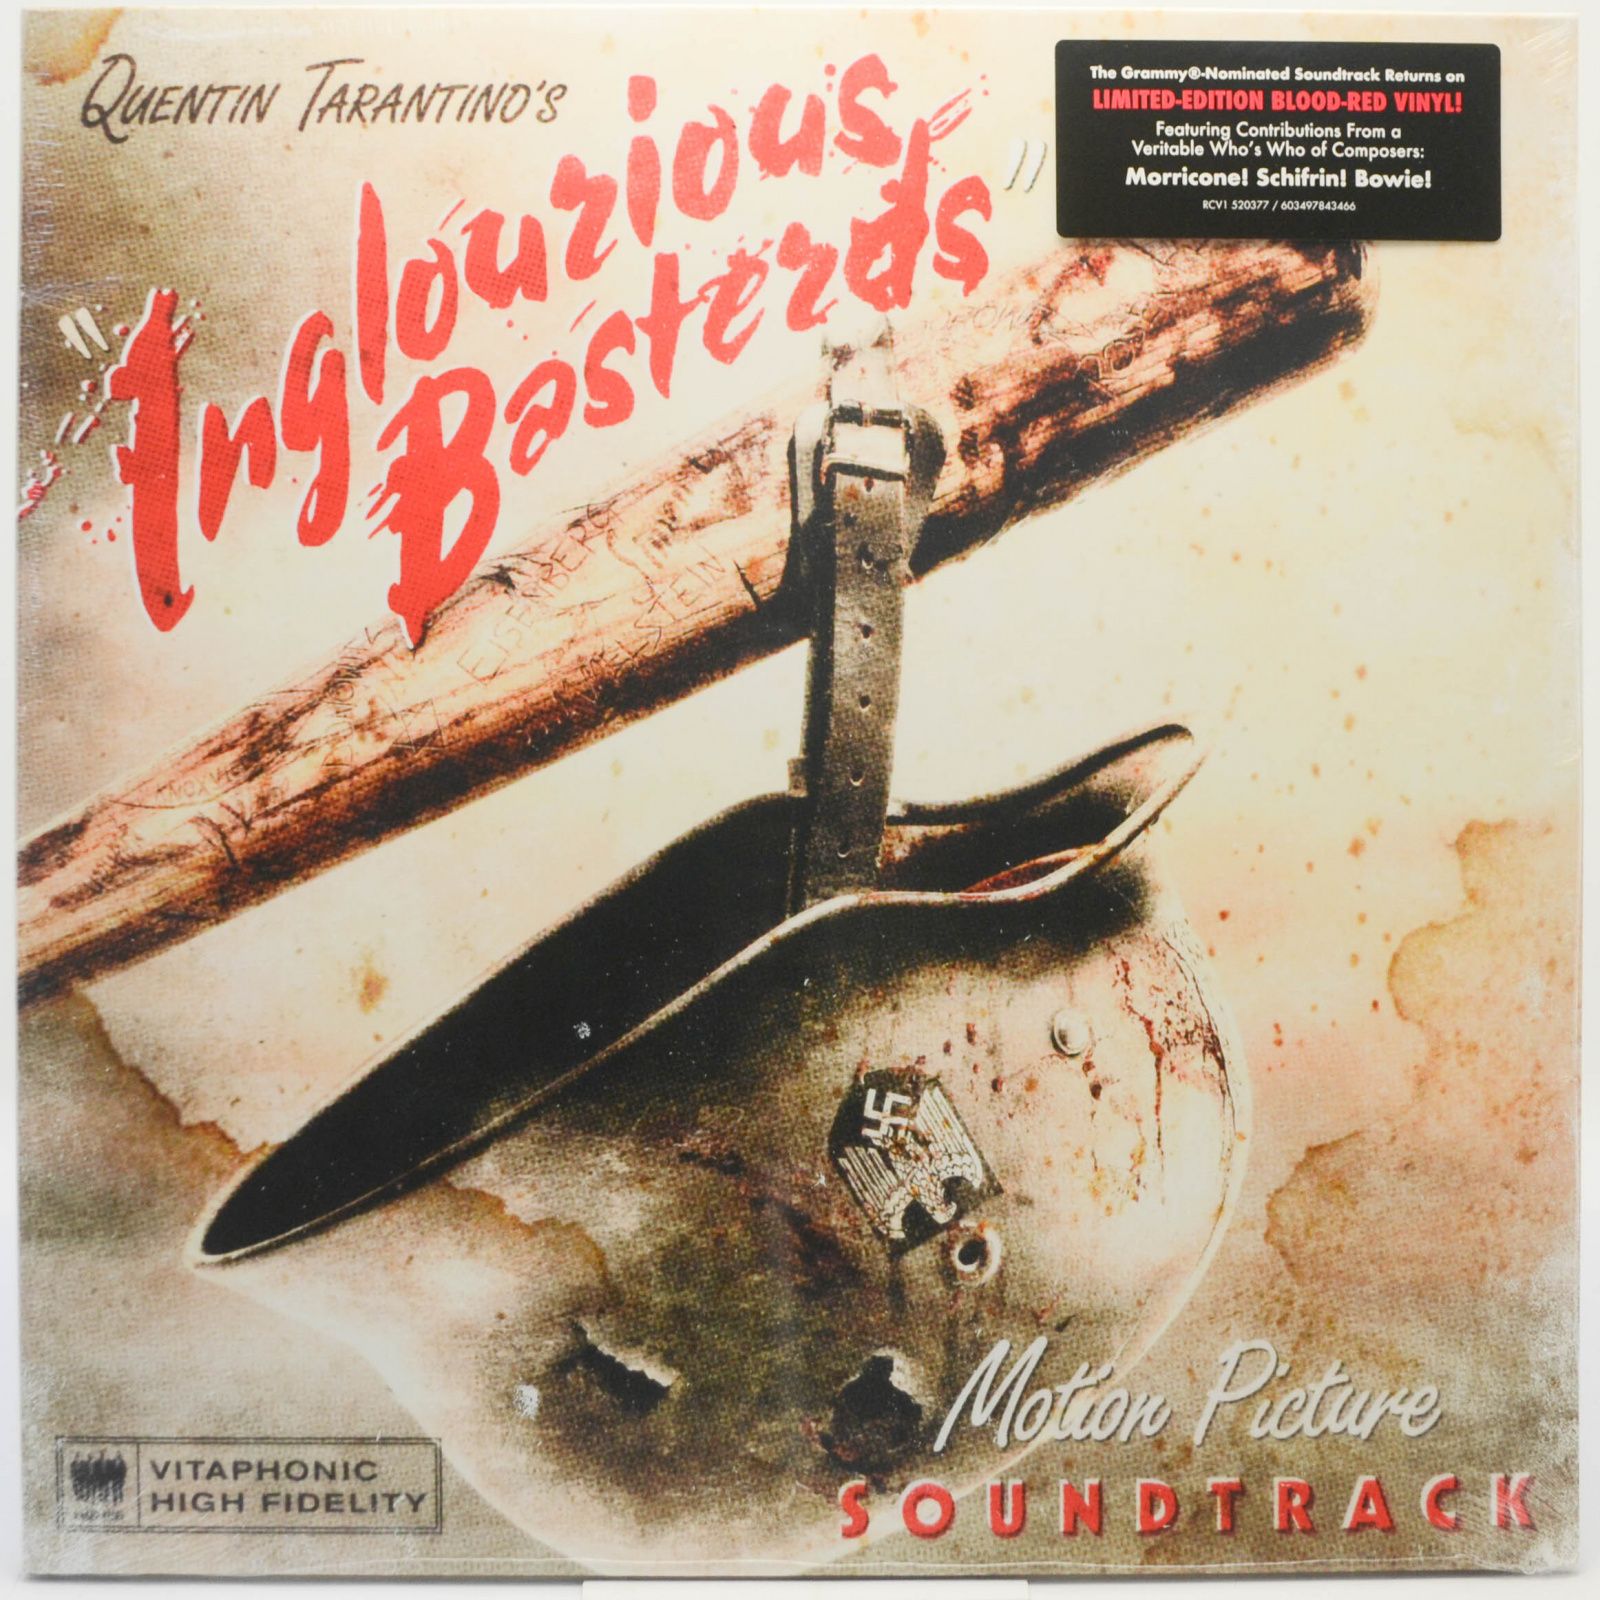 Quentin Tarantino's Inglourious Basterds (Motion Picture Soundtrack), 2009